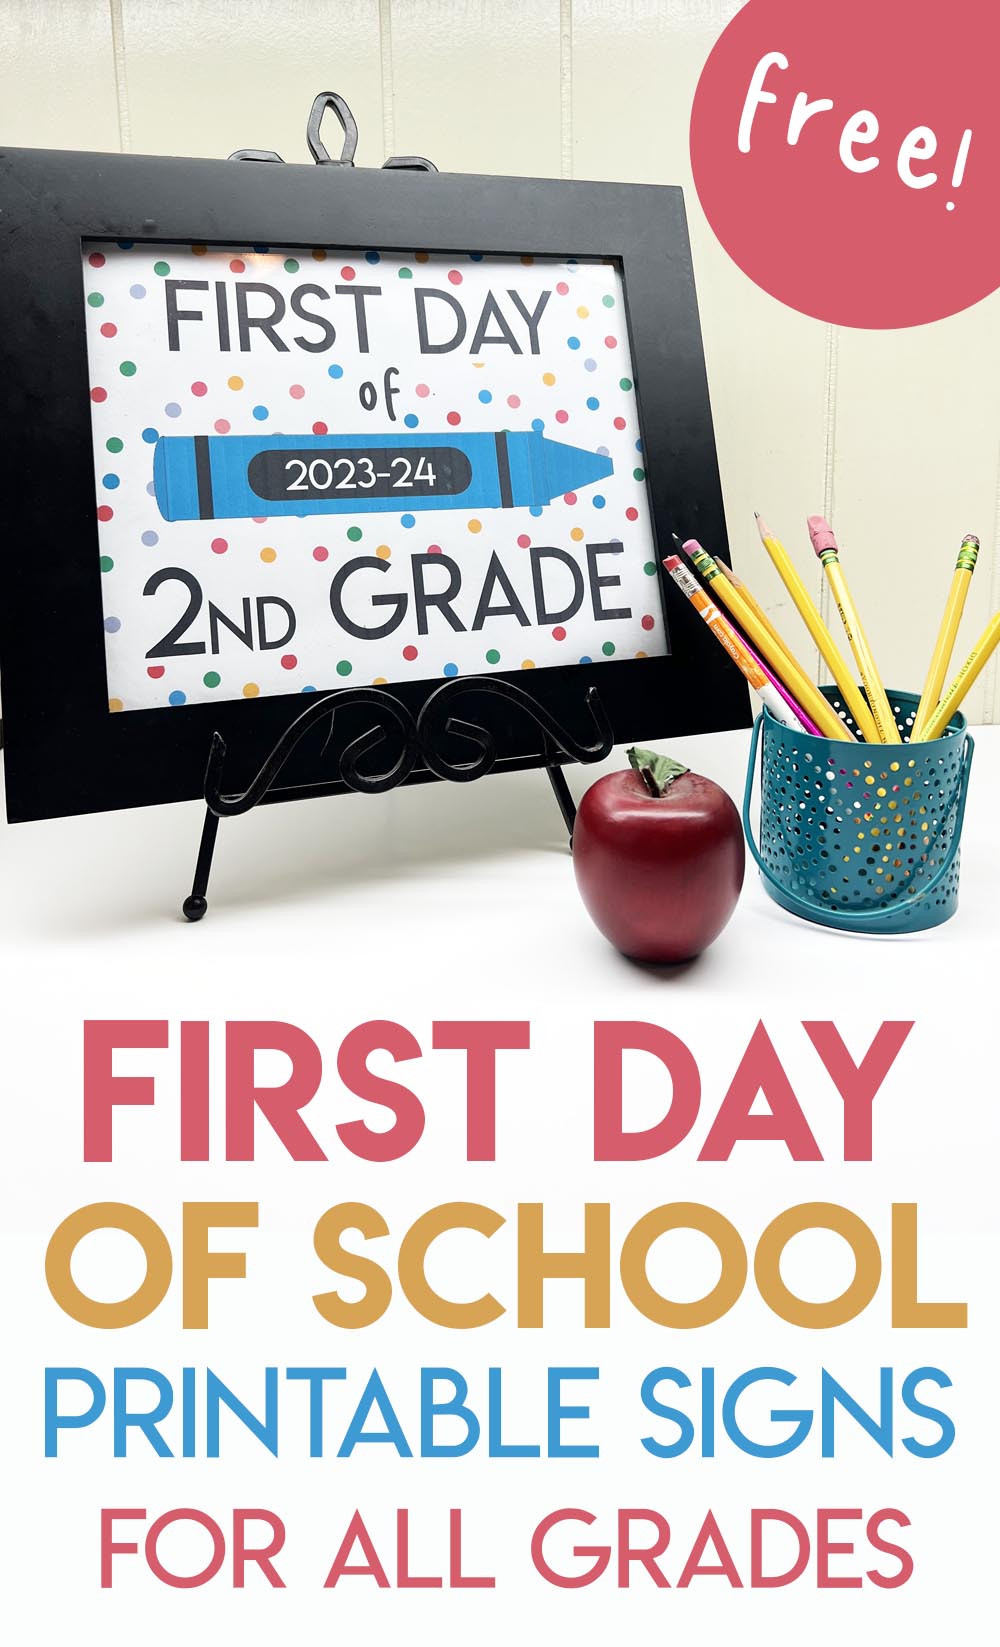 Use these adorable printable signs to take your child's first day of school photo! Signs available for all grades 2023-24 school year. via @lara_neves